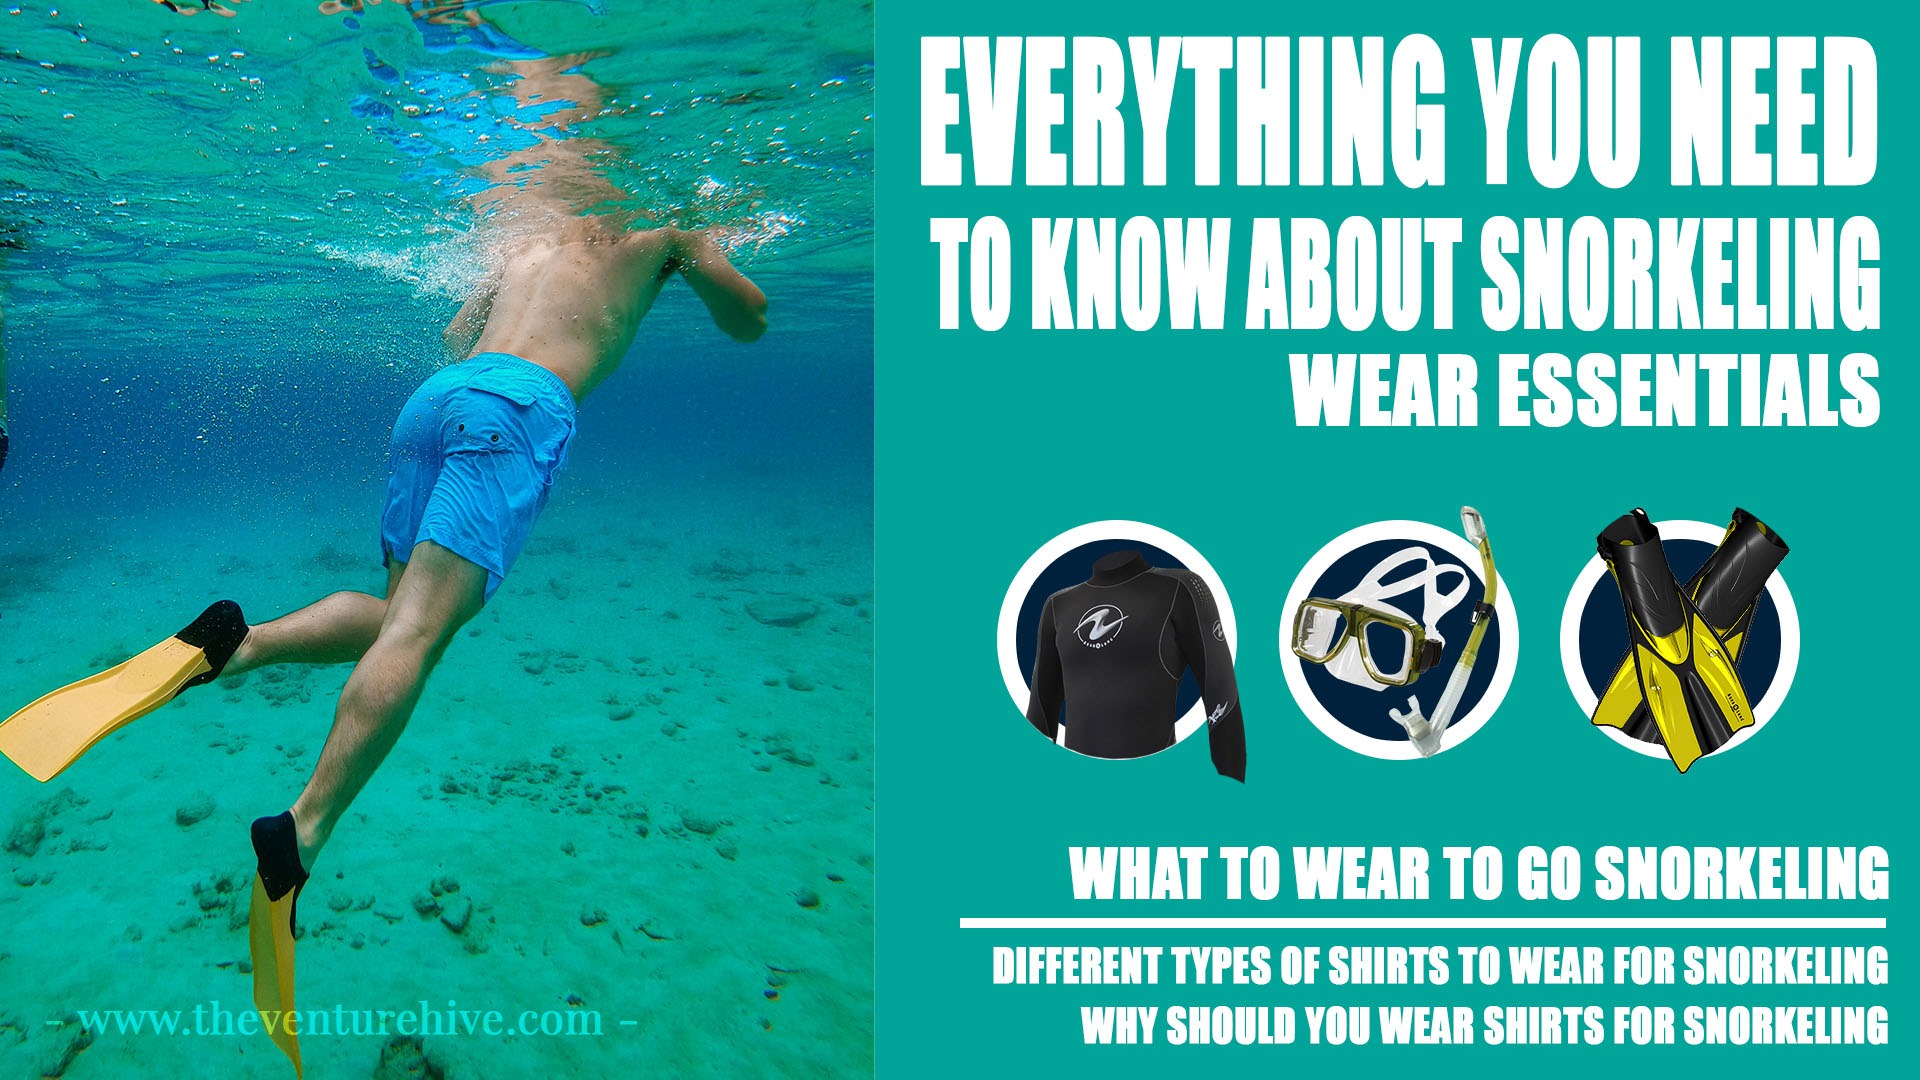 What to wear to go snorkeling